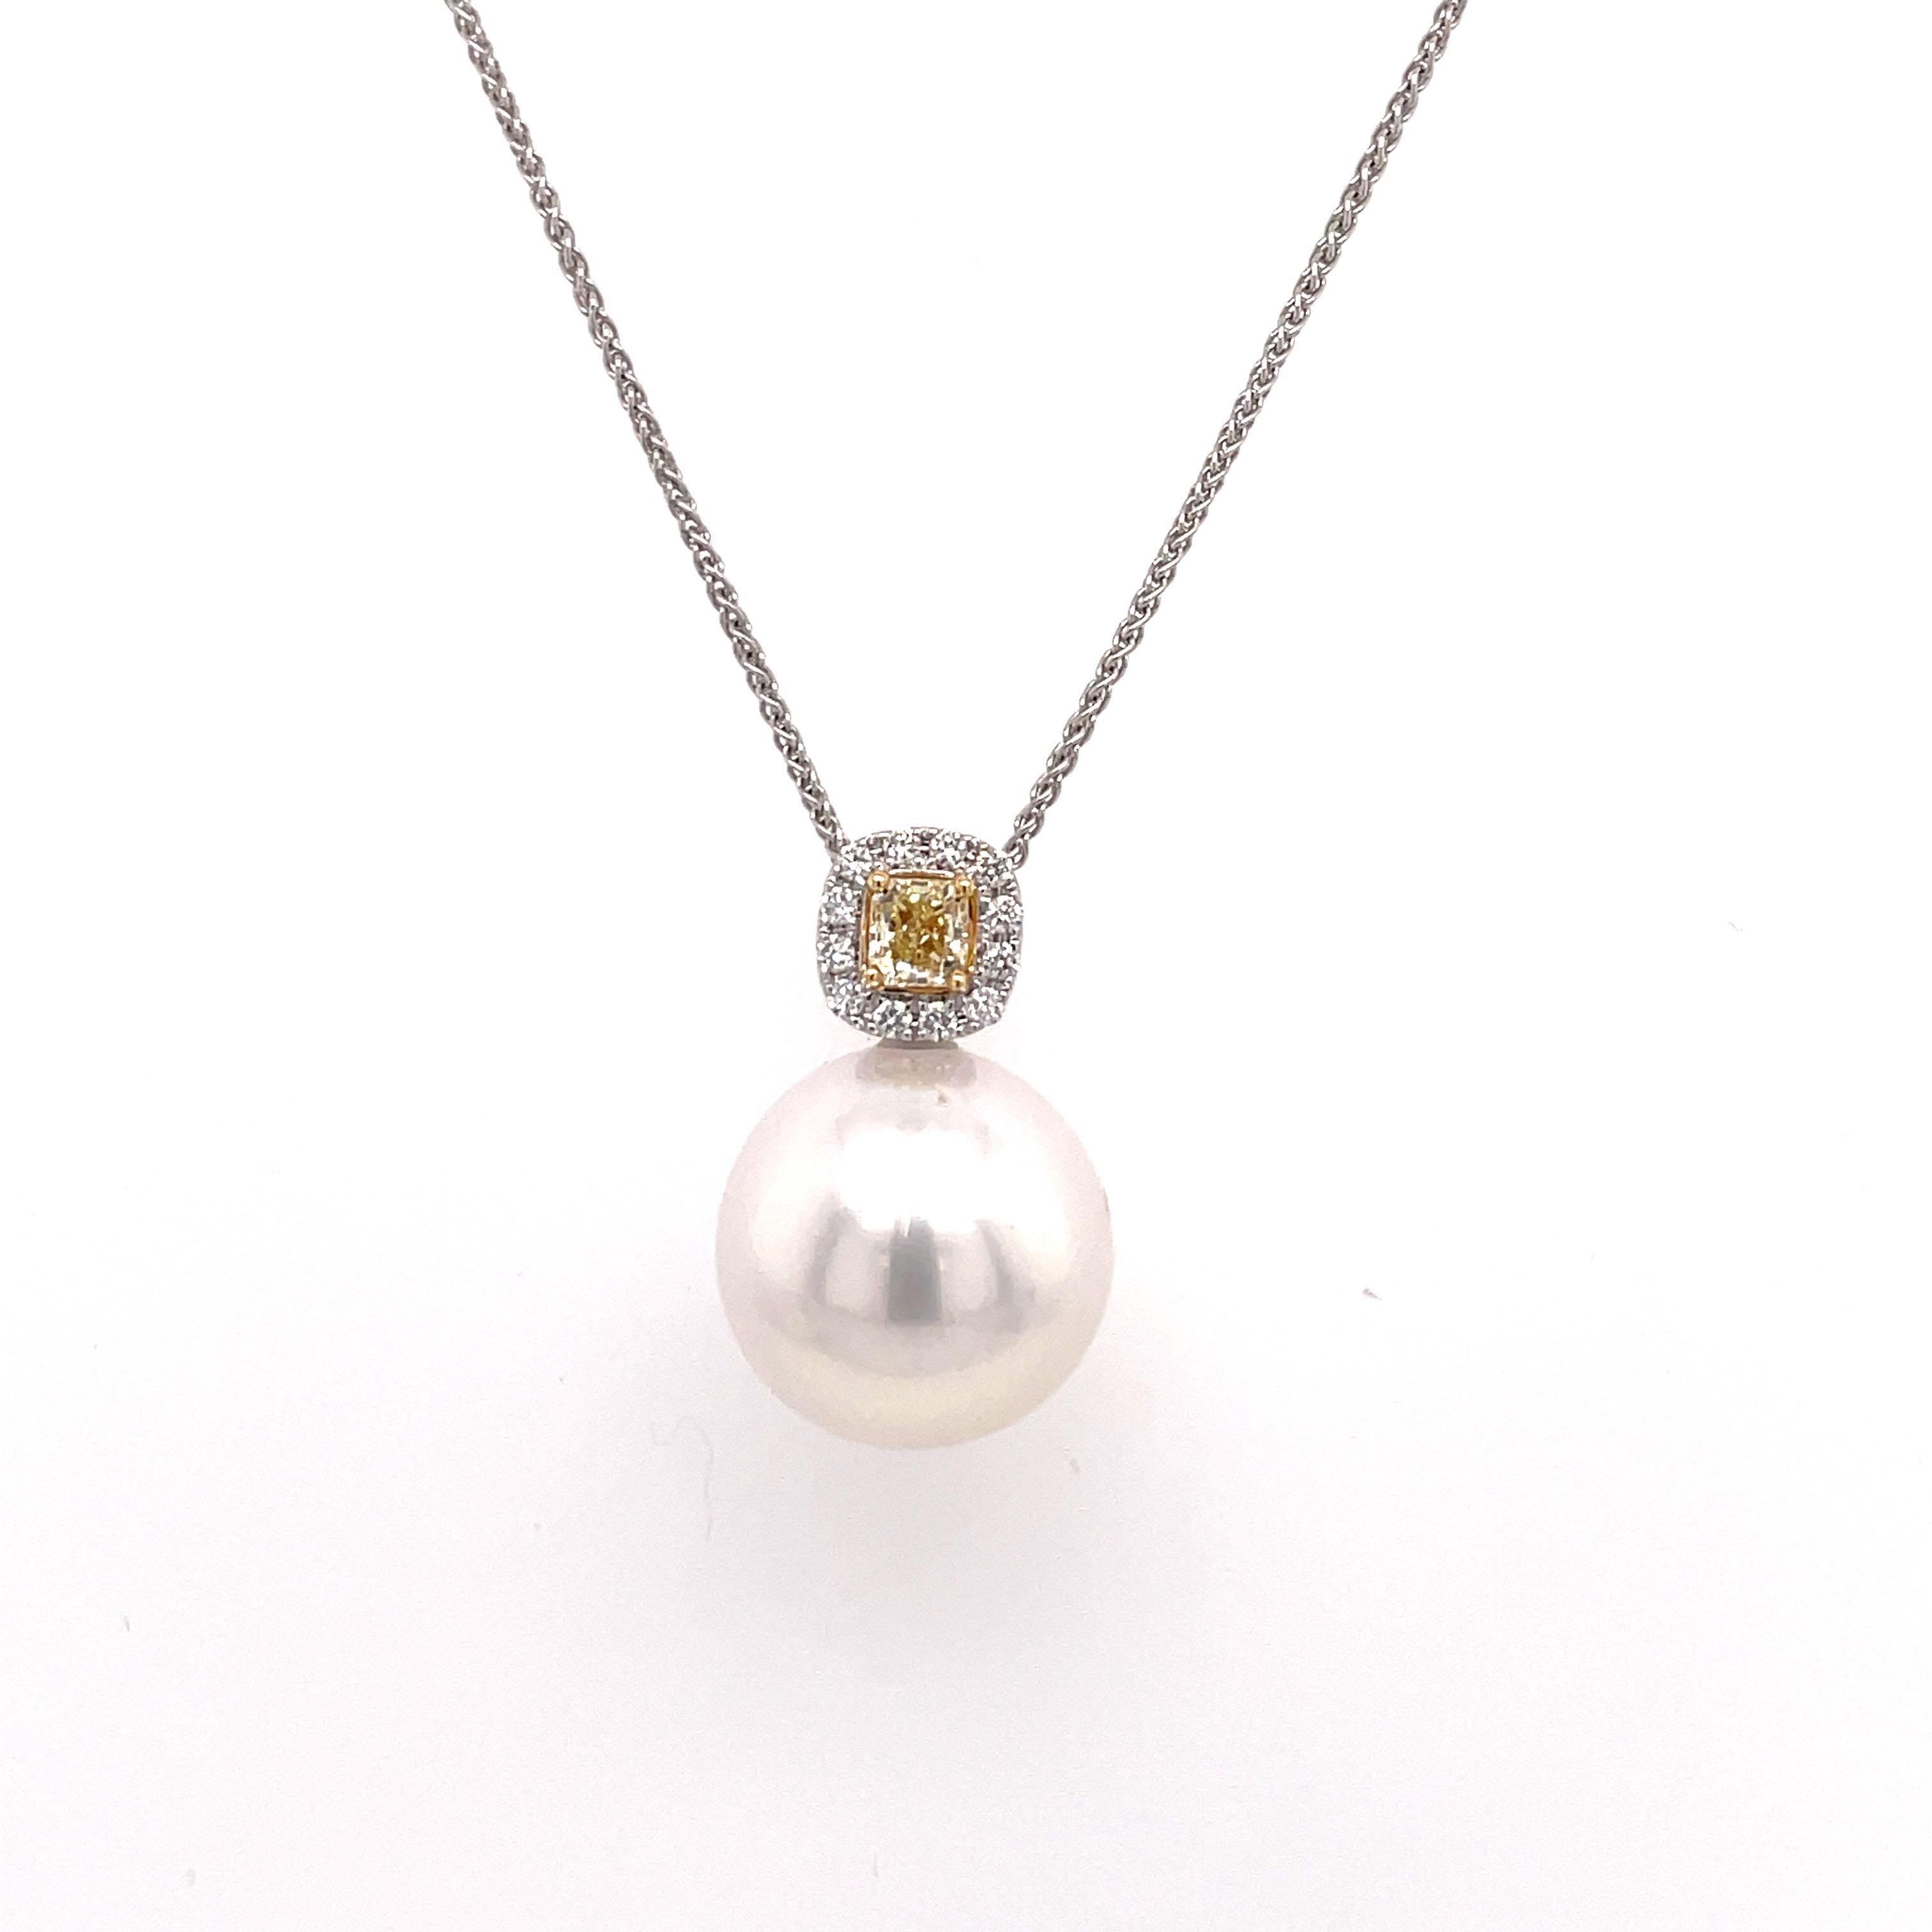 18 Karat White Gold pendant featuring one South Sea Pearl measuring 14-15 mm with a Radiant cut yellow diamond weighing 0.25 carats flanked with round brilliants weighing 0.12 carats.
Color G-H
Clarity SI 